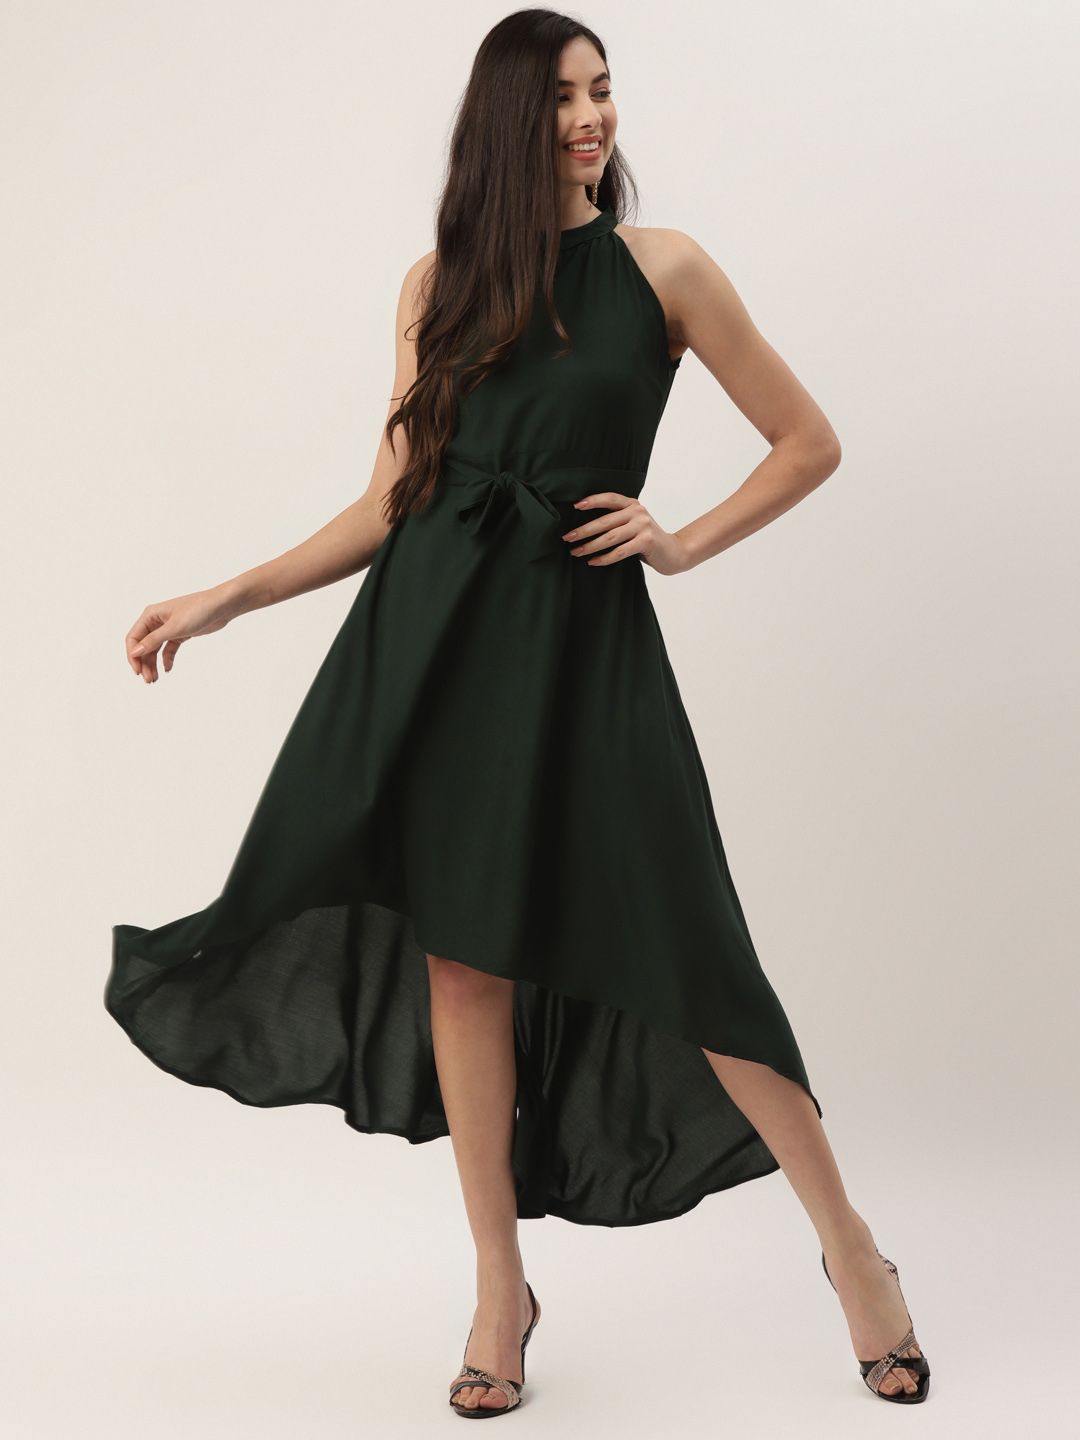 VAABA Green Solid High-Low Fit & Flare Dress Price in India